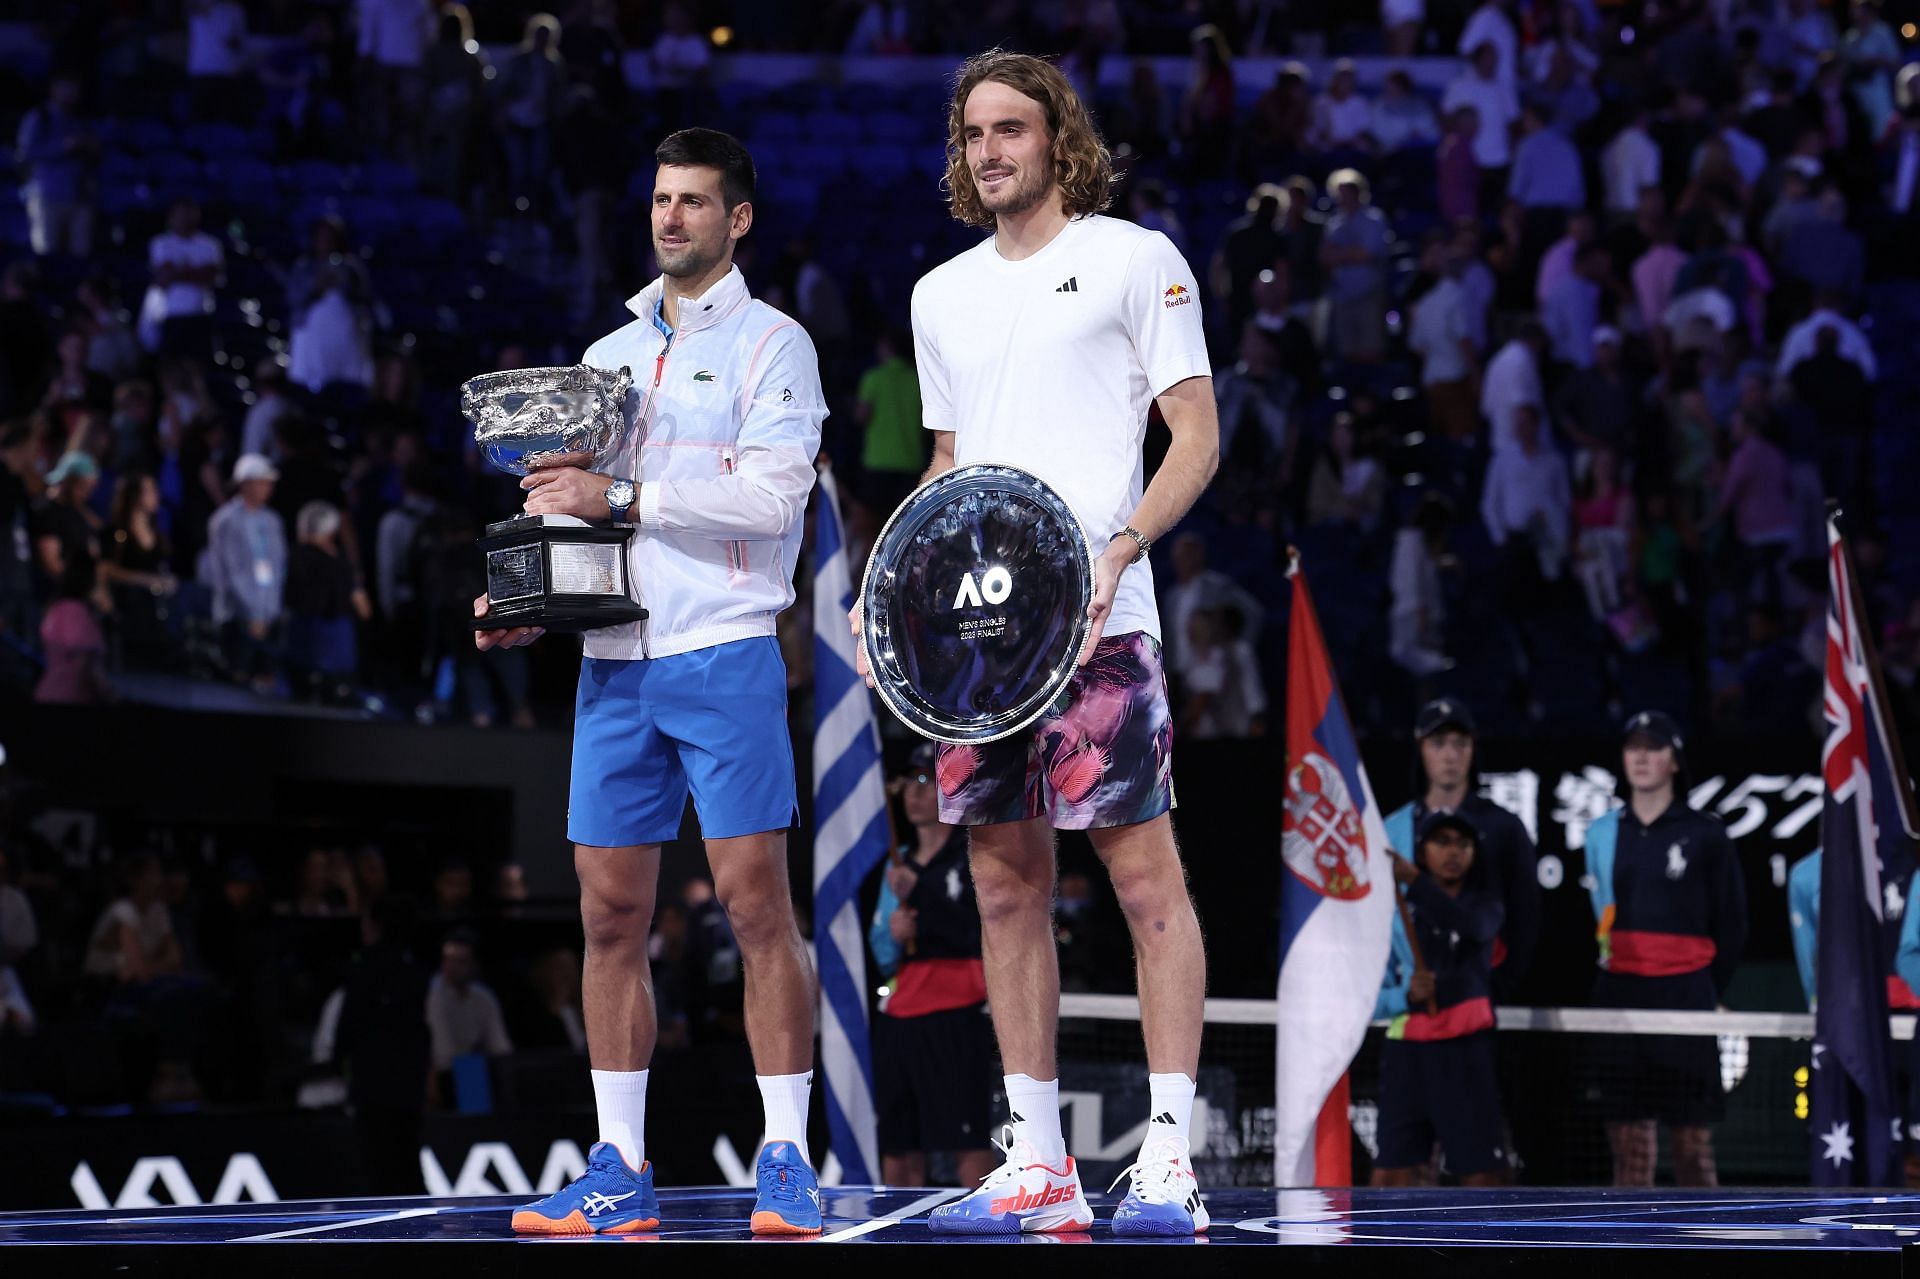 Novak Djokovic and Stefanos Tsitsipas (R) pictured at the 2023 Australian Open trophy ceremony